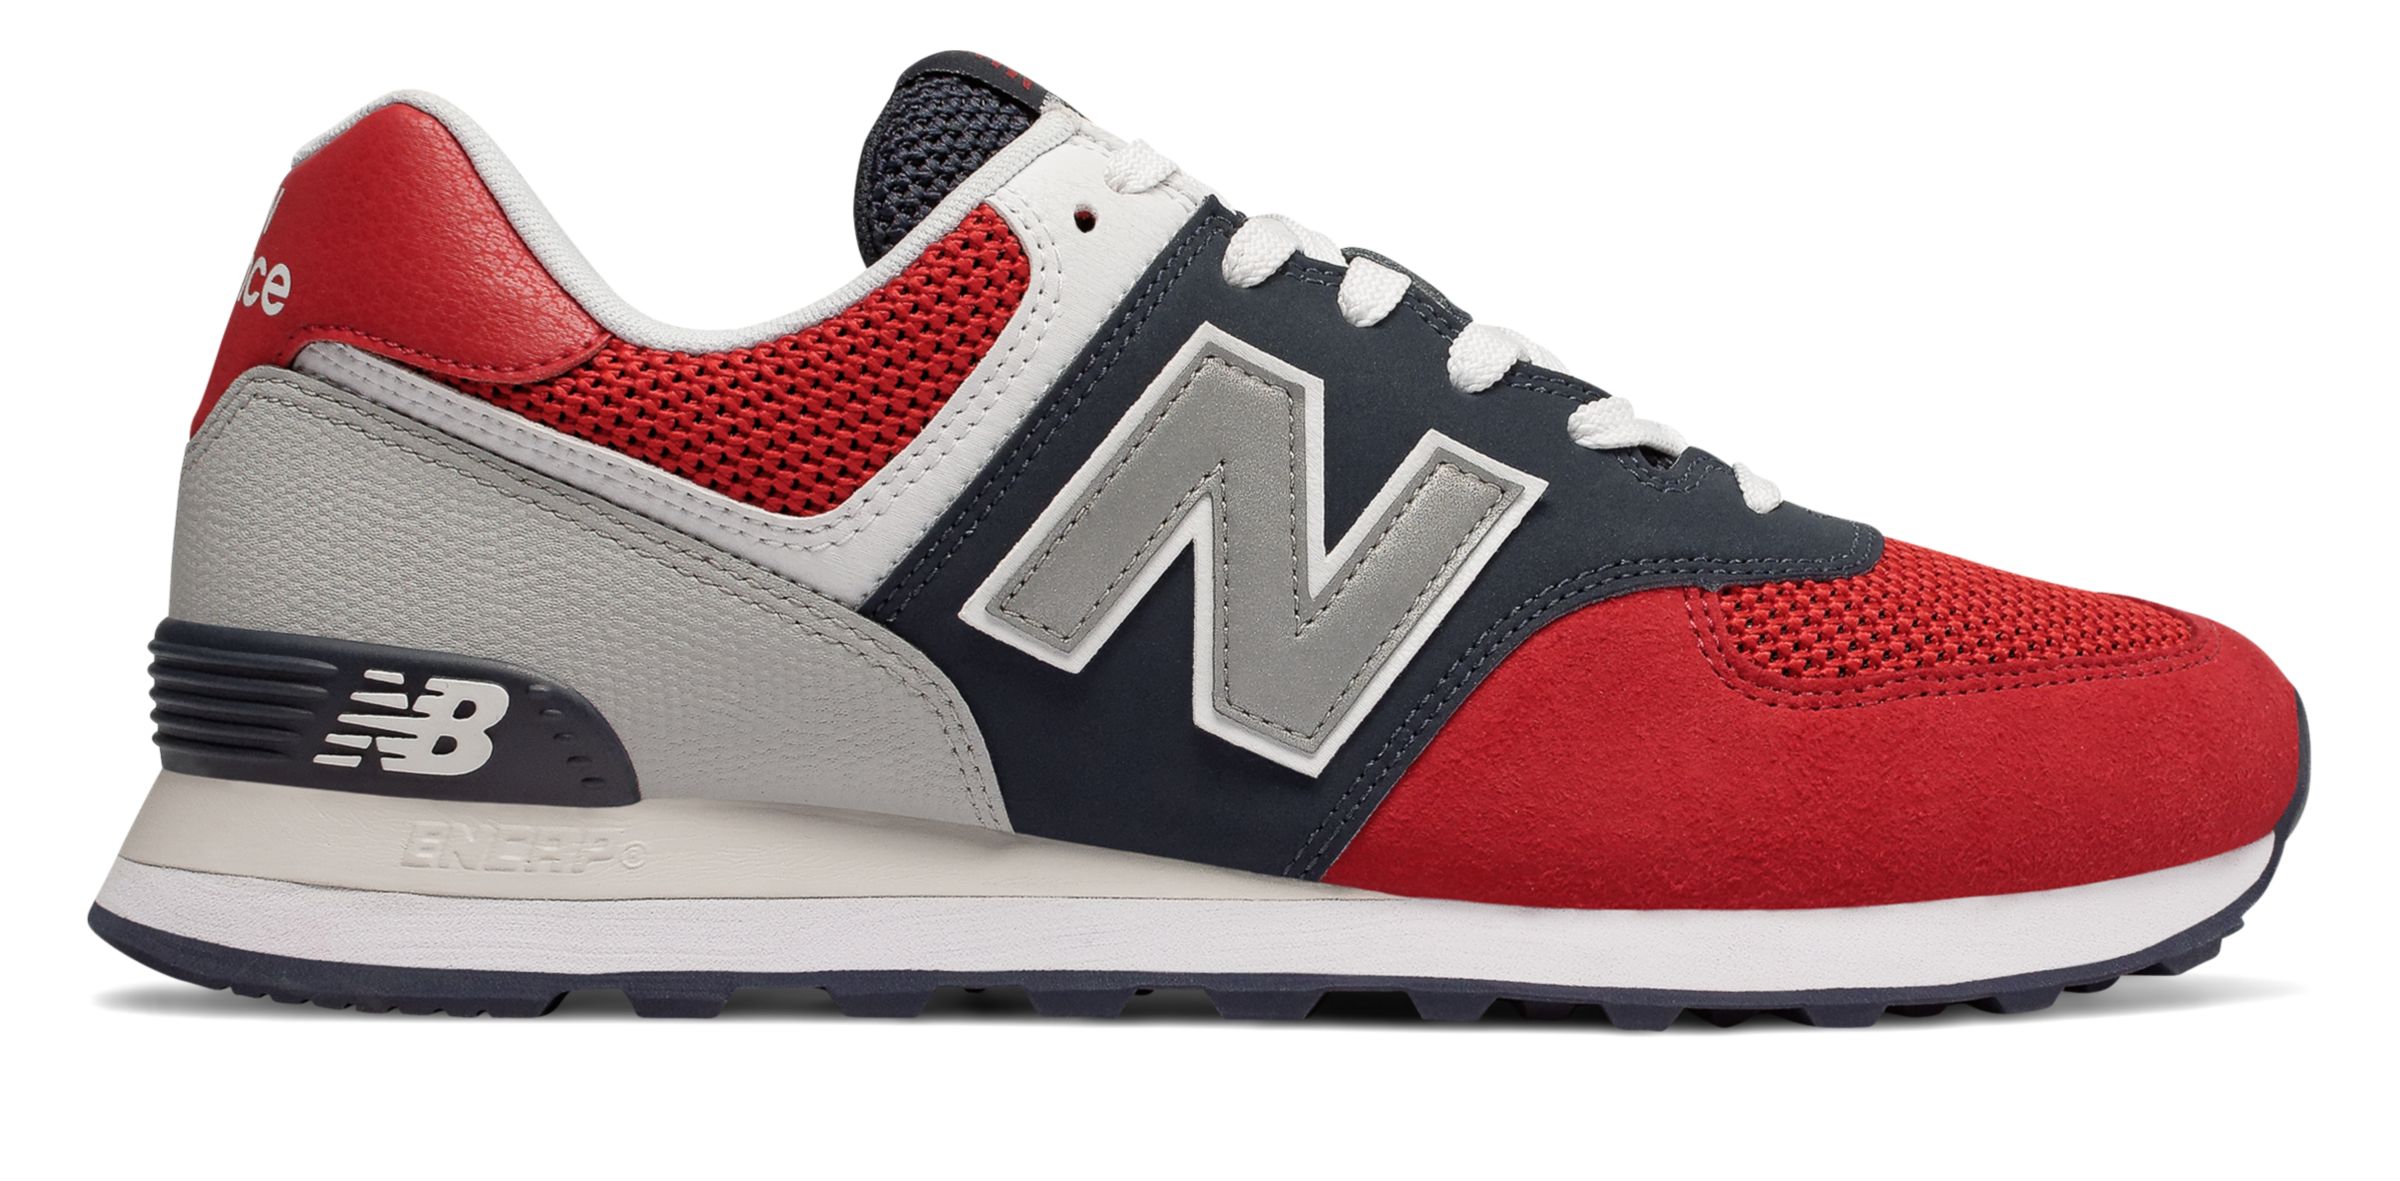 new balance 996 red and gold